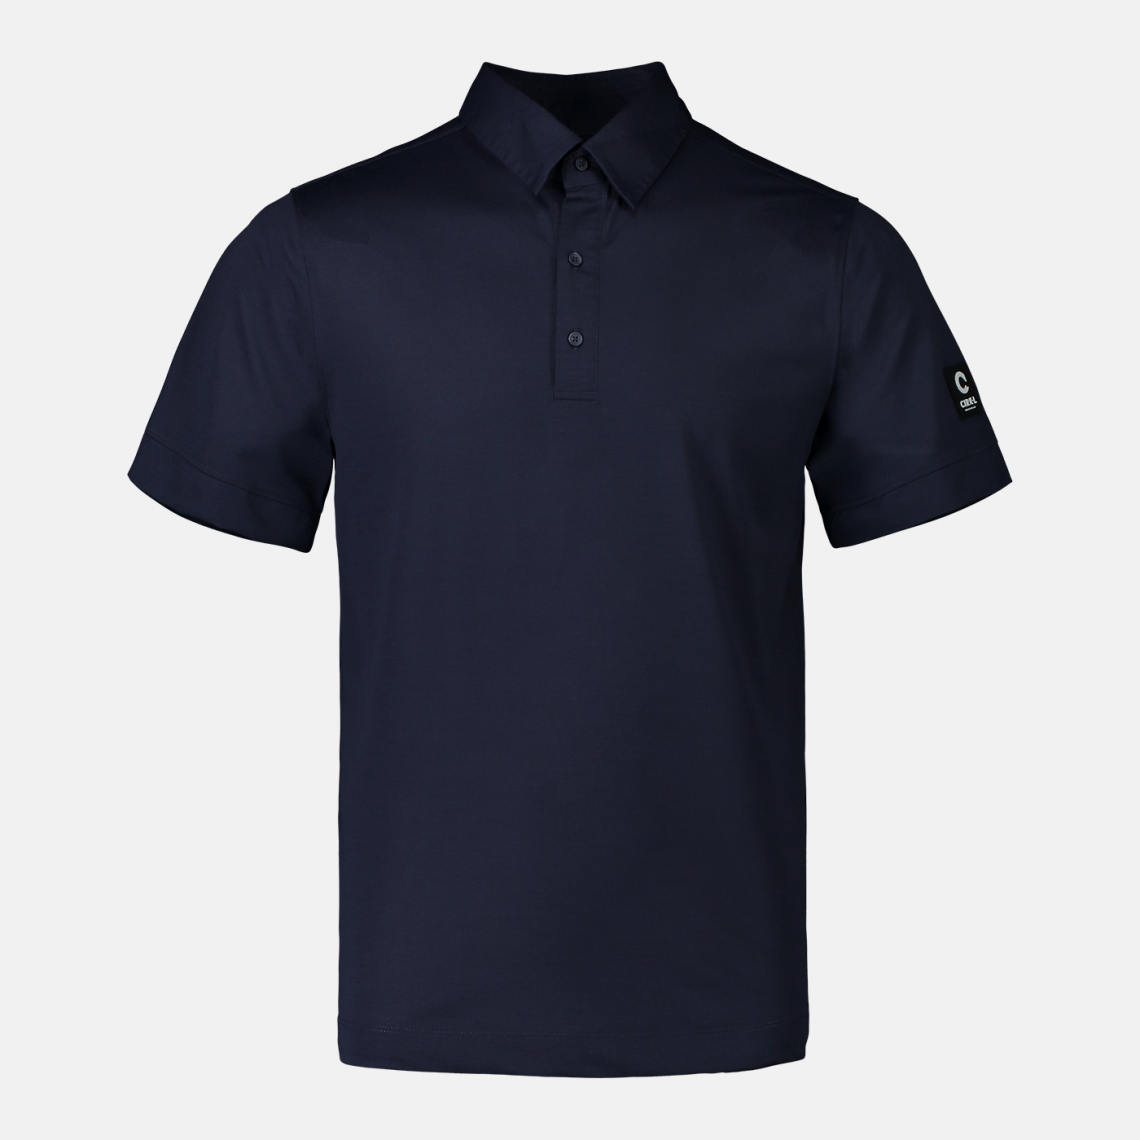 Polo shirt with high moisture wicking capacity